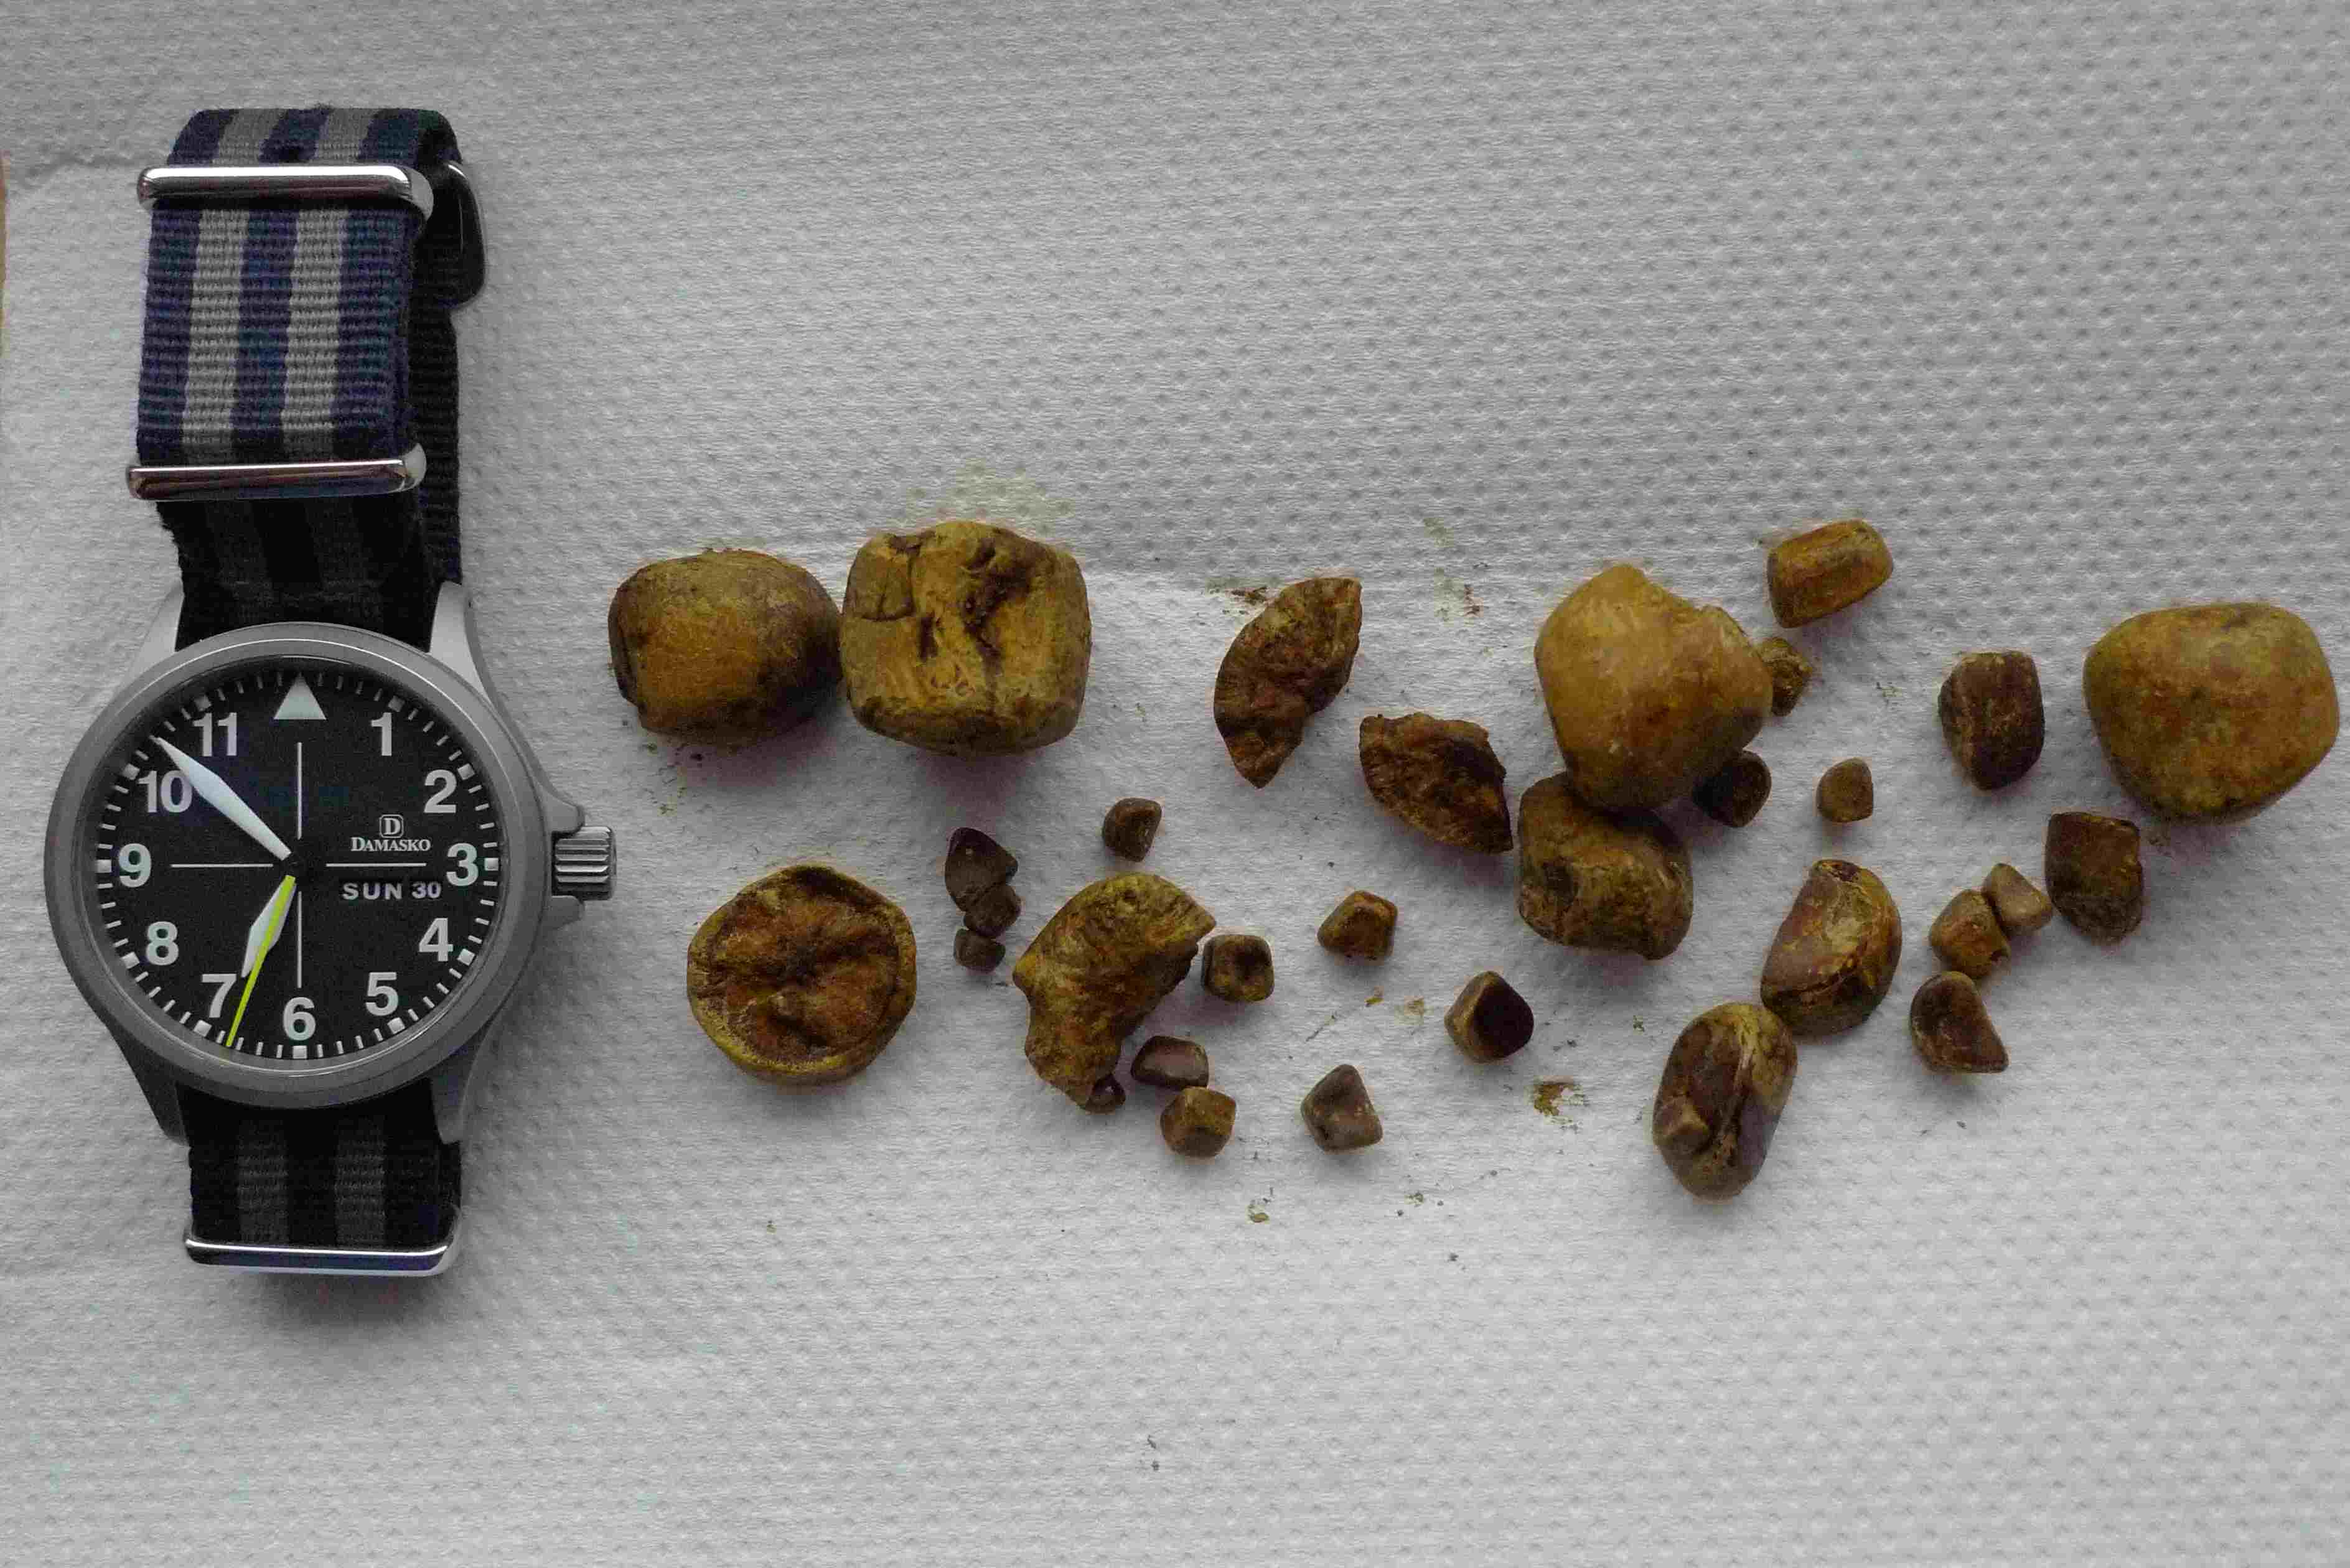 Having my gallbladder removed, what to expect re’ recovery - Page 4 - Health Matters - PistonHeads UK - The image displays a black watch with a white face and a single blue second hand on a surface. Adjacent to the watch, there is a pile of crushed poppy seeds, which appear to be from an opium poppy plant. The seeds are clustered together and look freshly collected. In the background, there is no clear context or additional details, but it seems to be a plain white surface that could be a table or desk. There are no texts or other objects present in the image. The focus is solely on the watch and the opium poppy seeds.